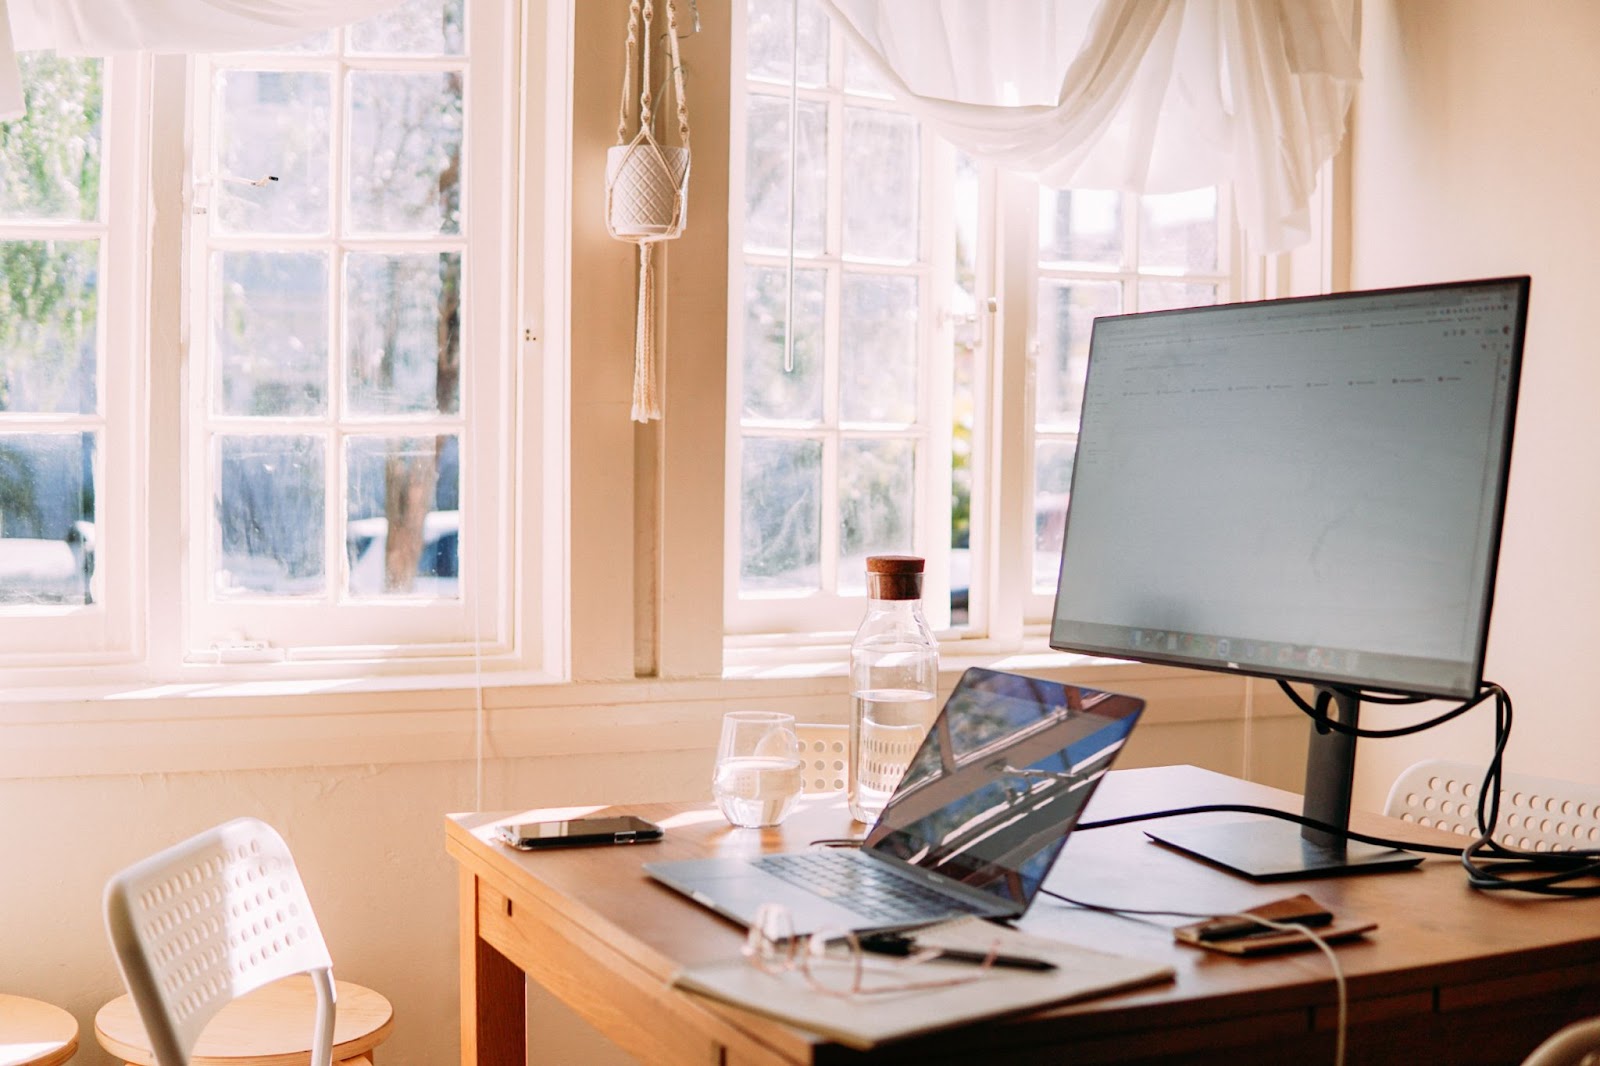 New To Remote Working? These 7 Tips Will Help You